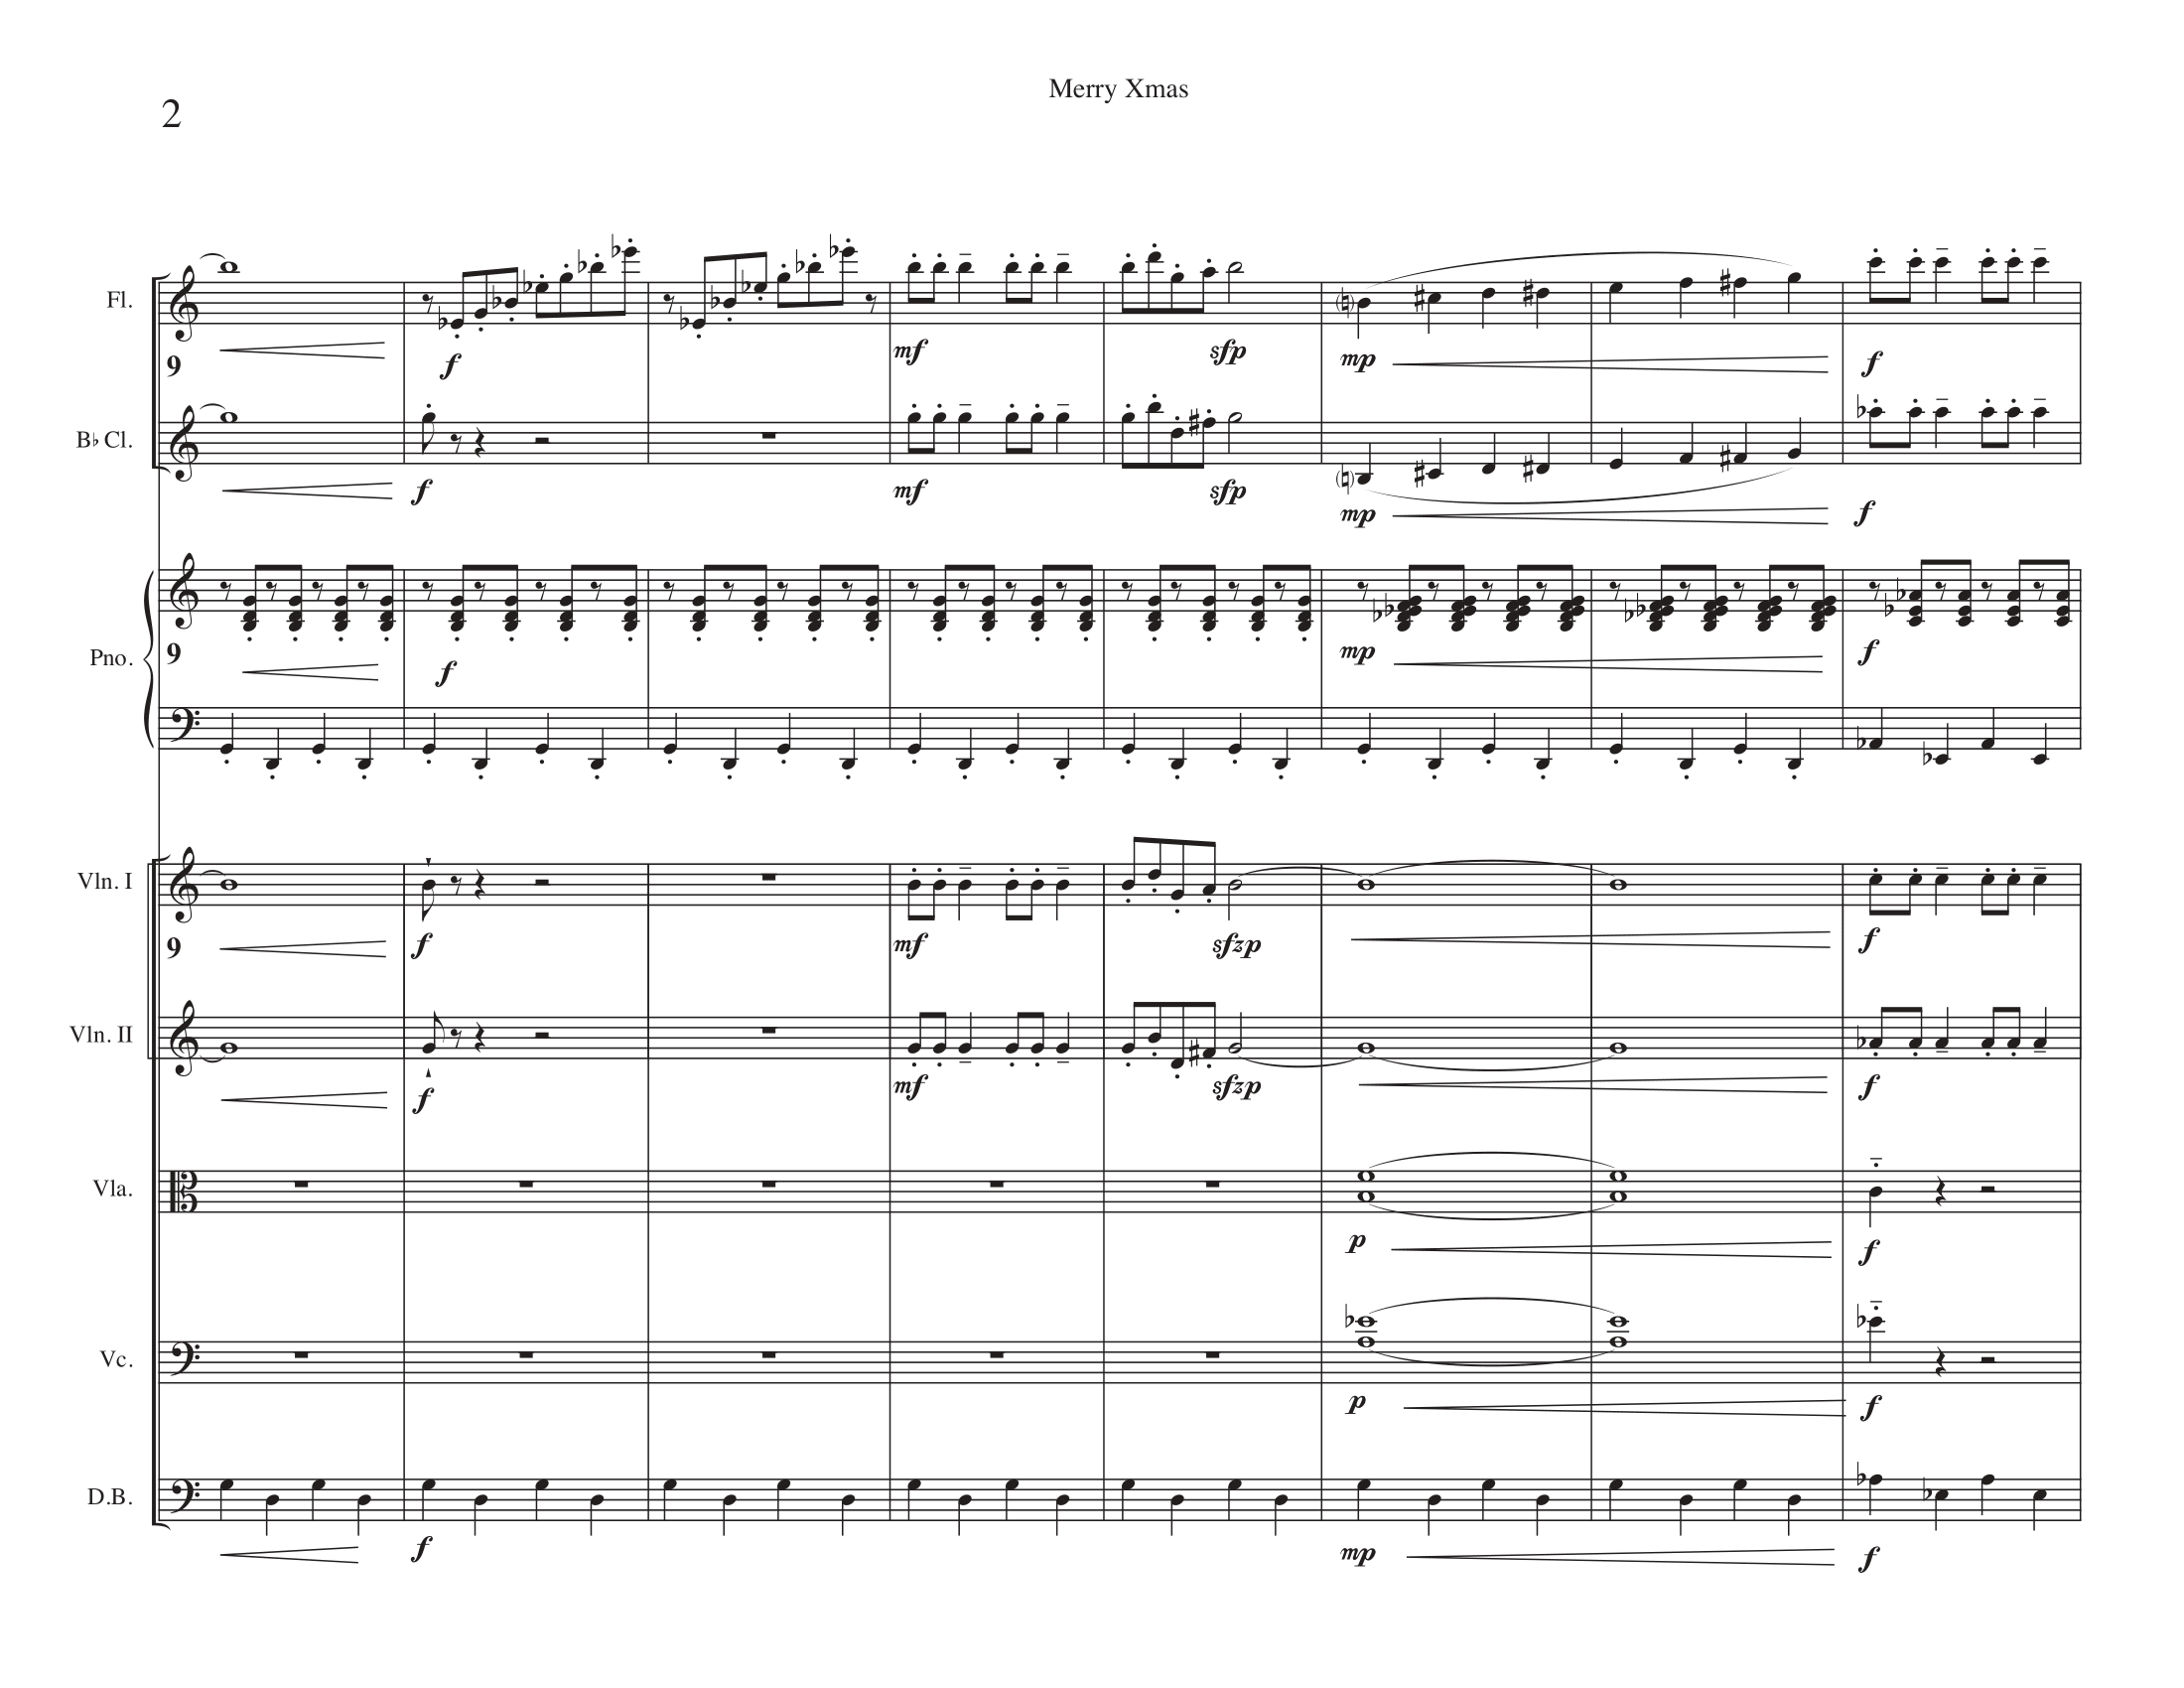 Merry Xmas Score v11 - Concert Score (dragged)-2.png